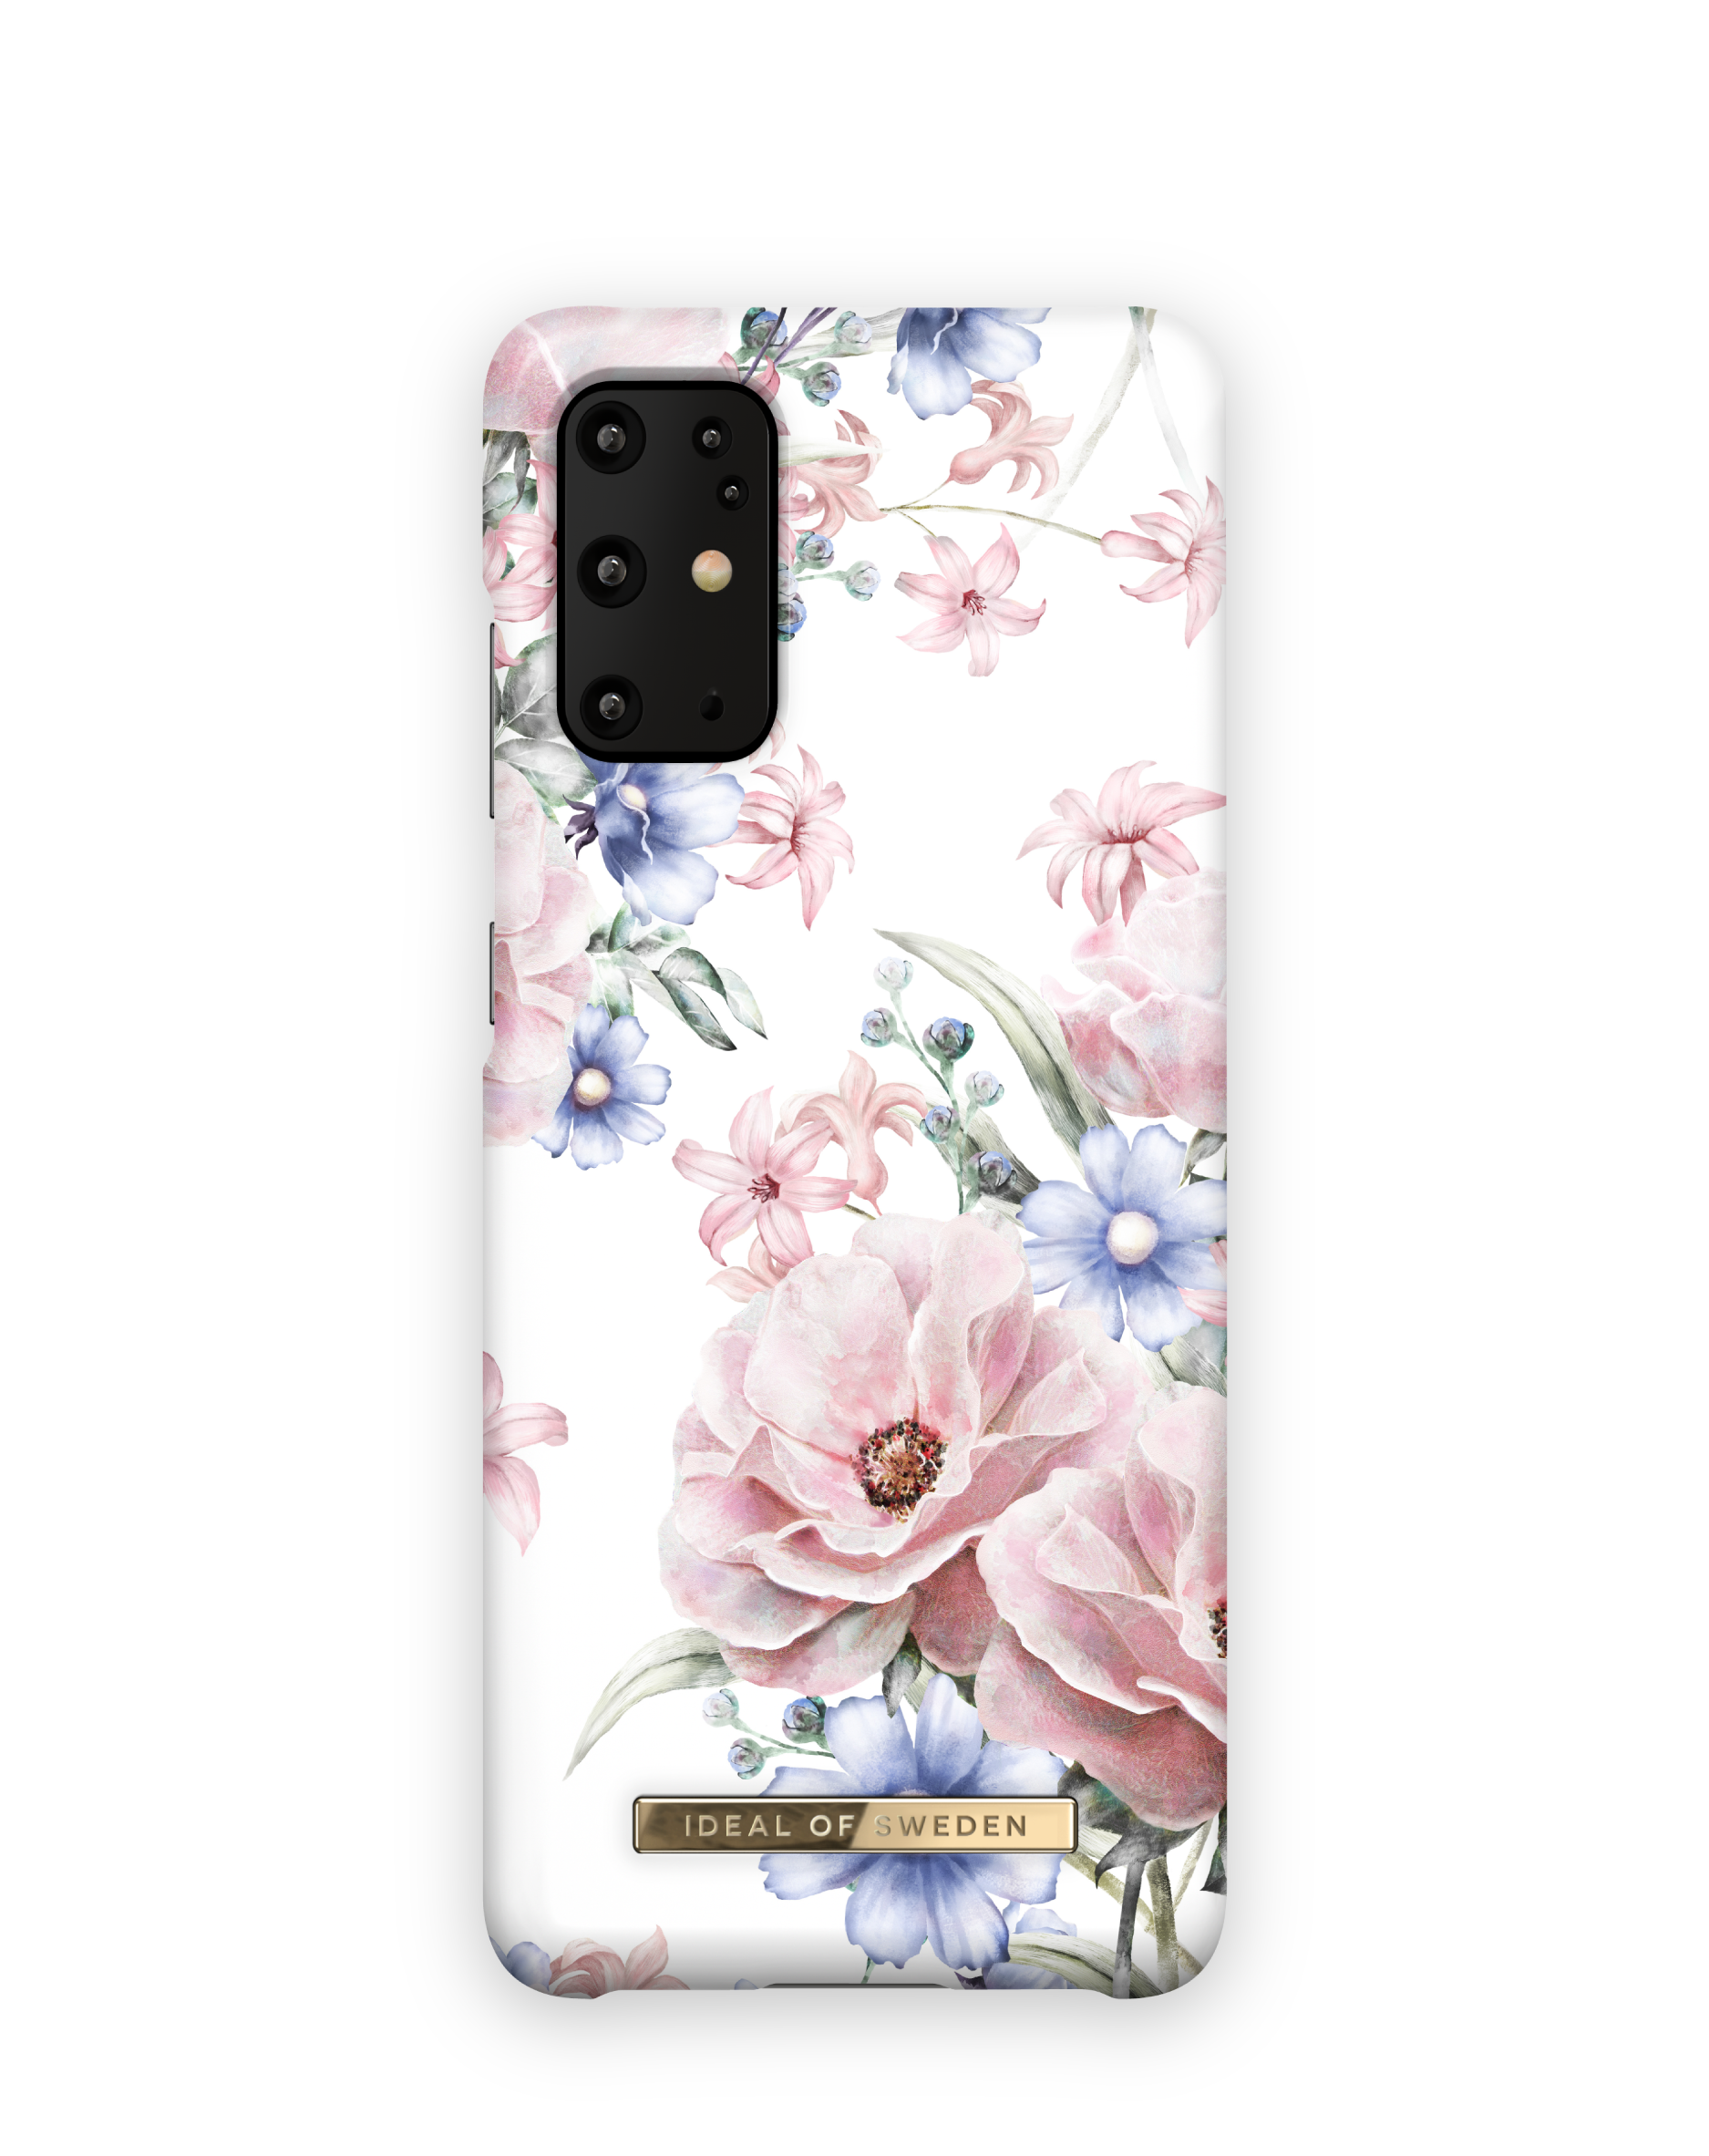 Backcover, SWEDEN IDFCS17-S11-58, Samsung, Galaxy IDEAL Romance Floral OF S20+,